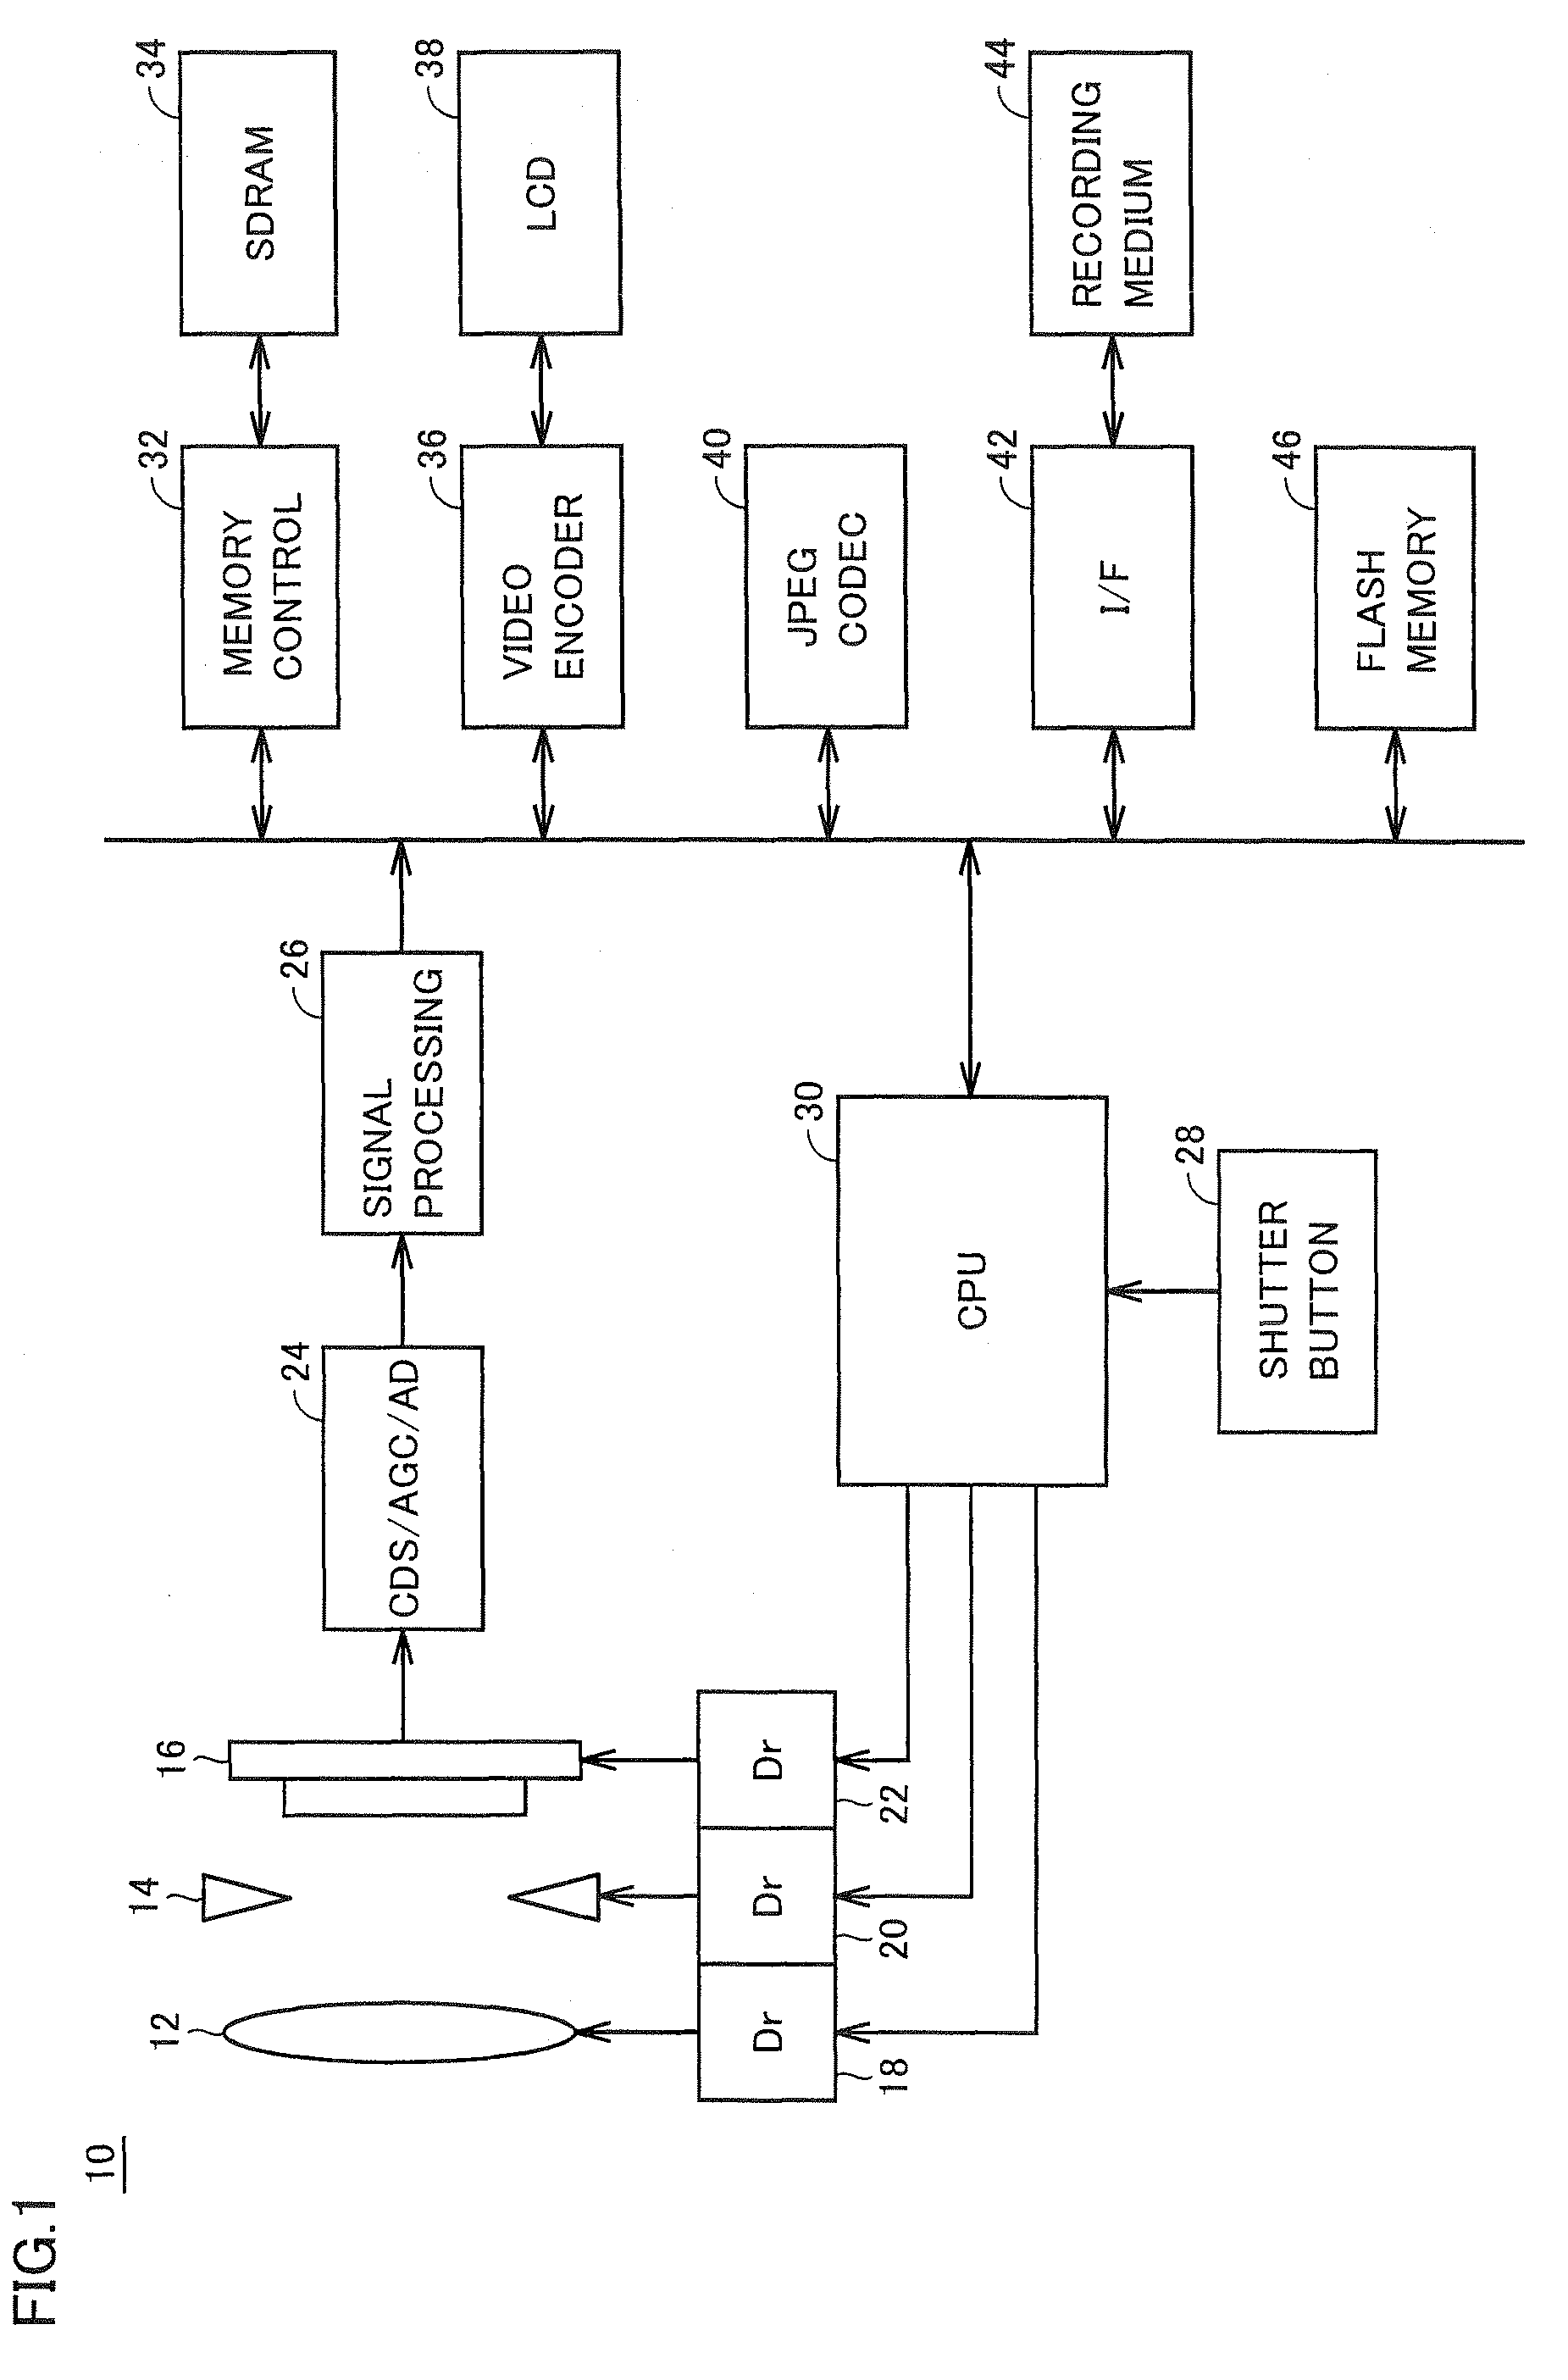 Semiconductor integrated circuit having normal mode and self-refresh mode